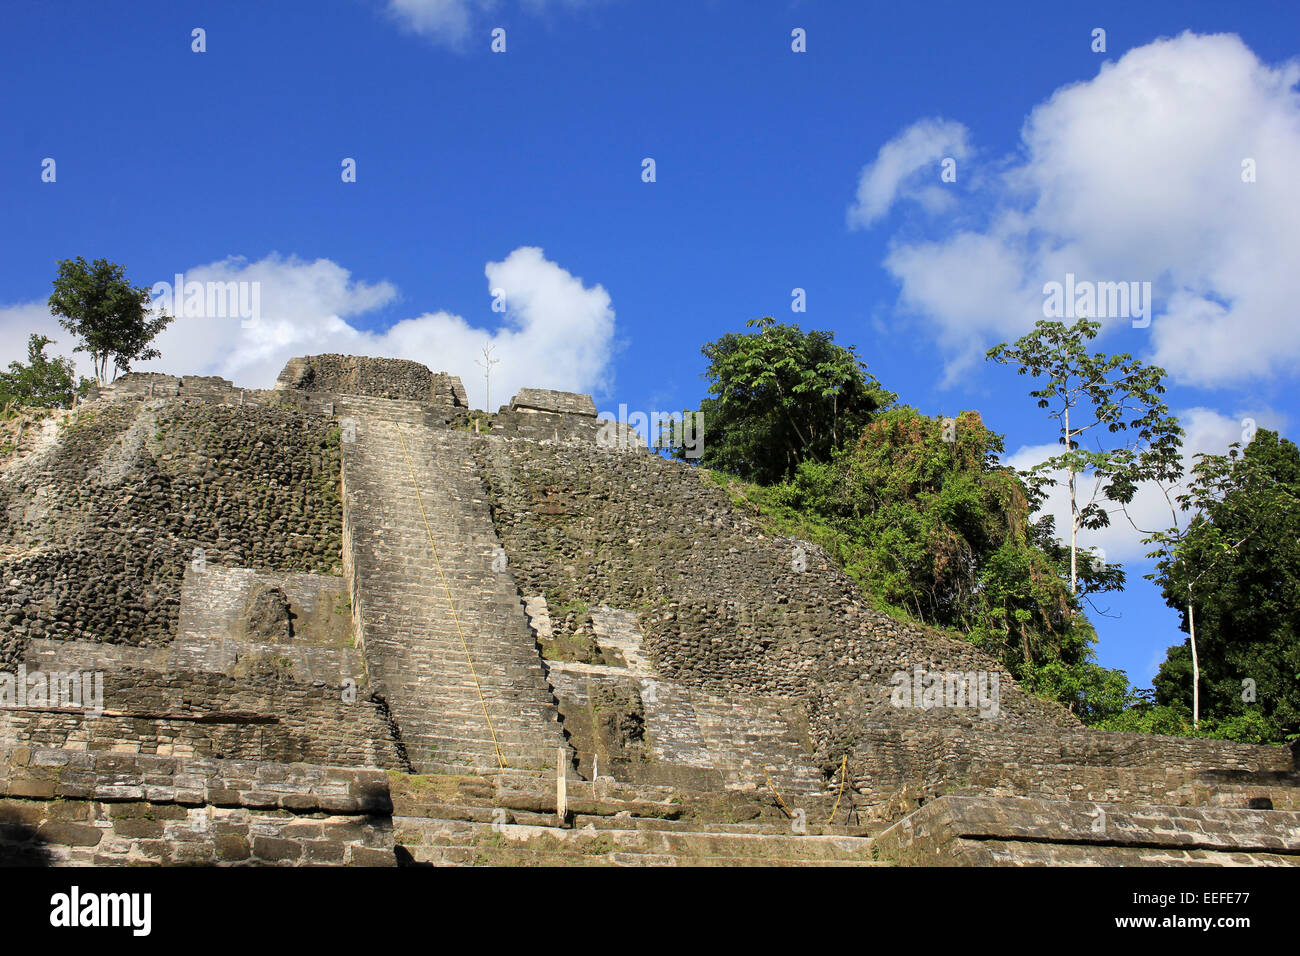 Mayan Temple At The Archaeological Site Of Lamanai, Belize Stock Photo